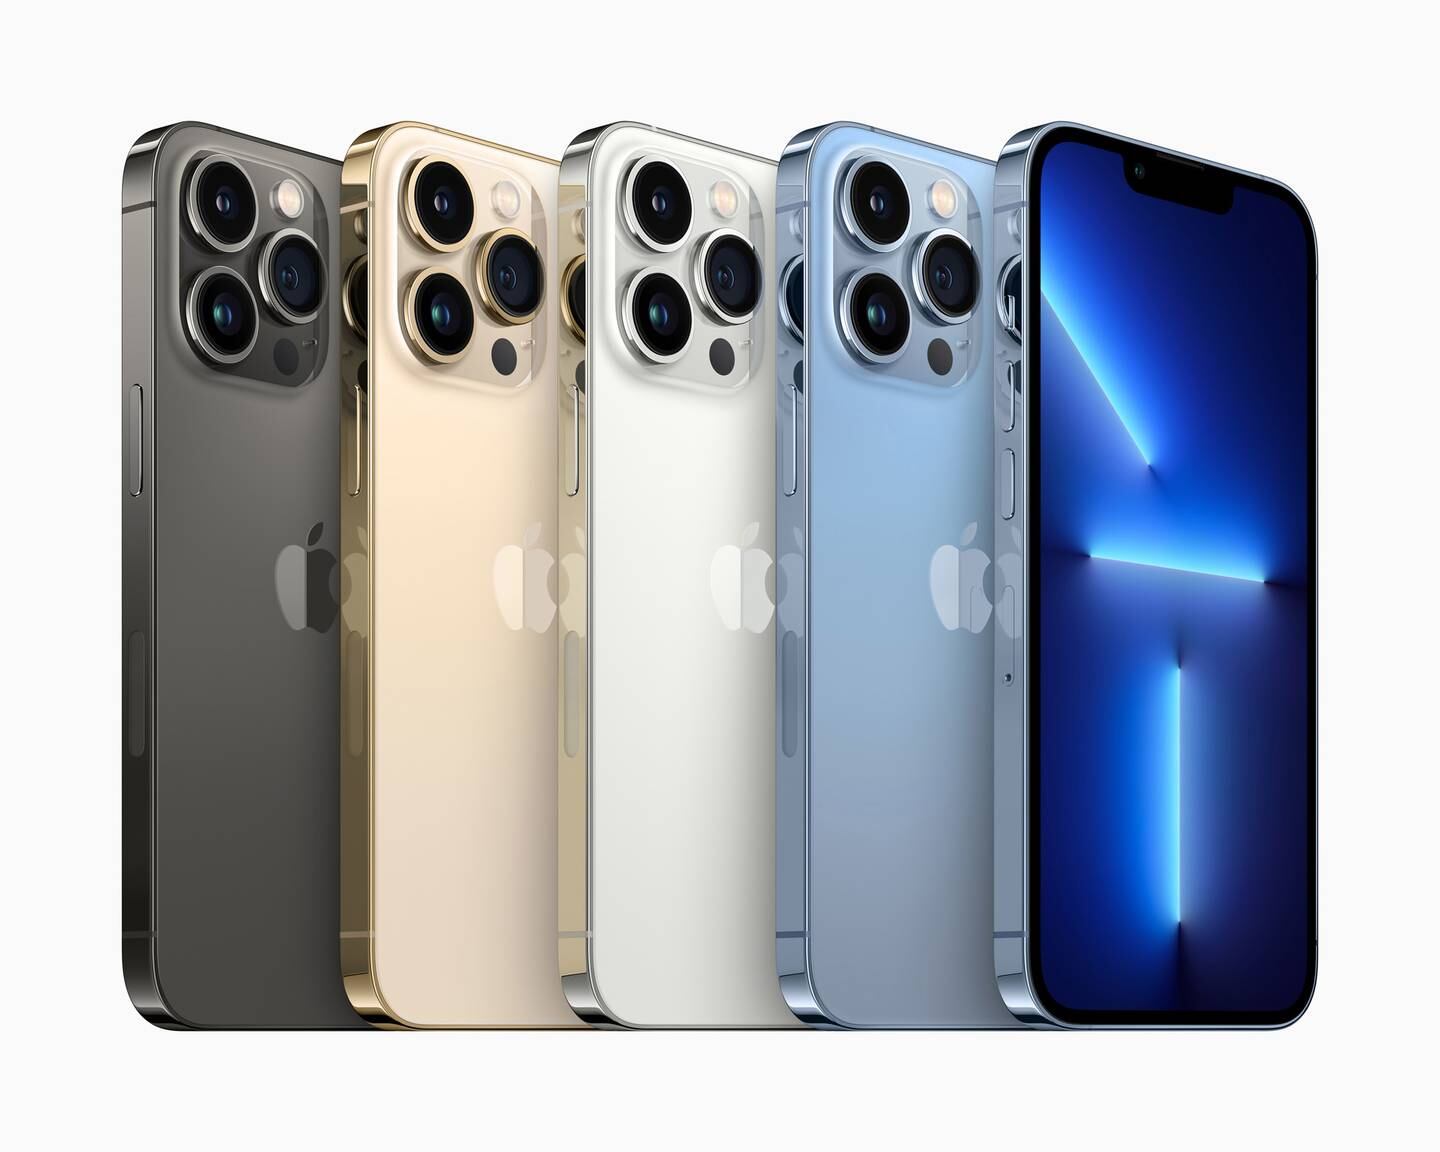 Apple introduces the new iPhone 13 Pro and iPhone 13 Pro Max, with all-new camera hardware. EPA